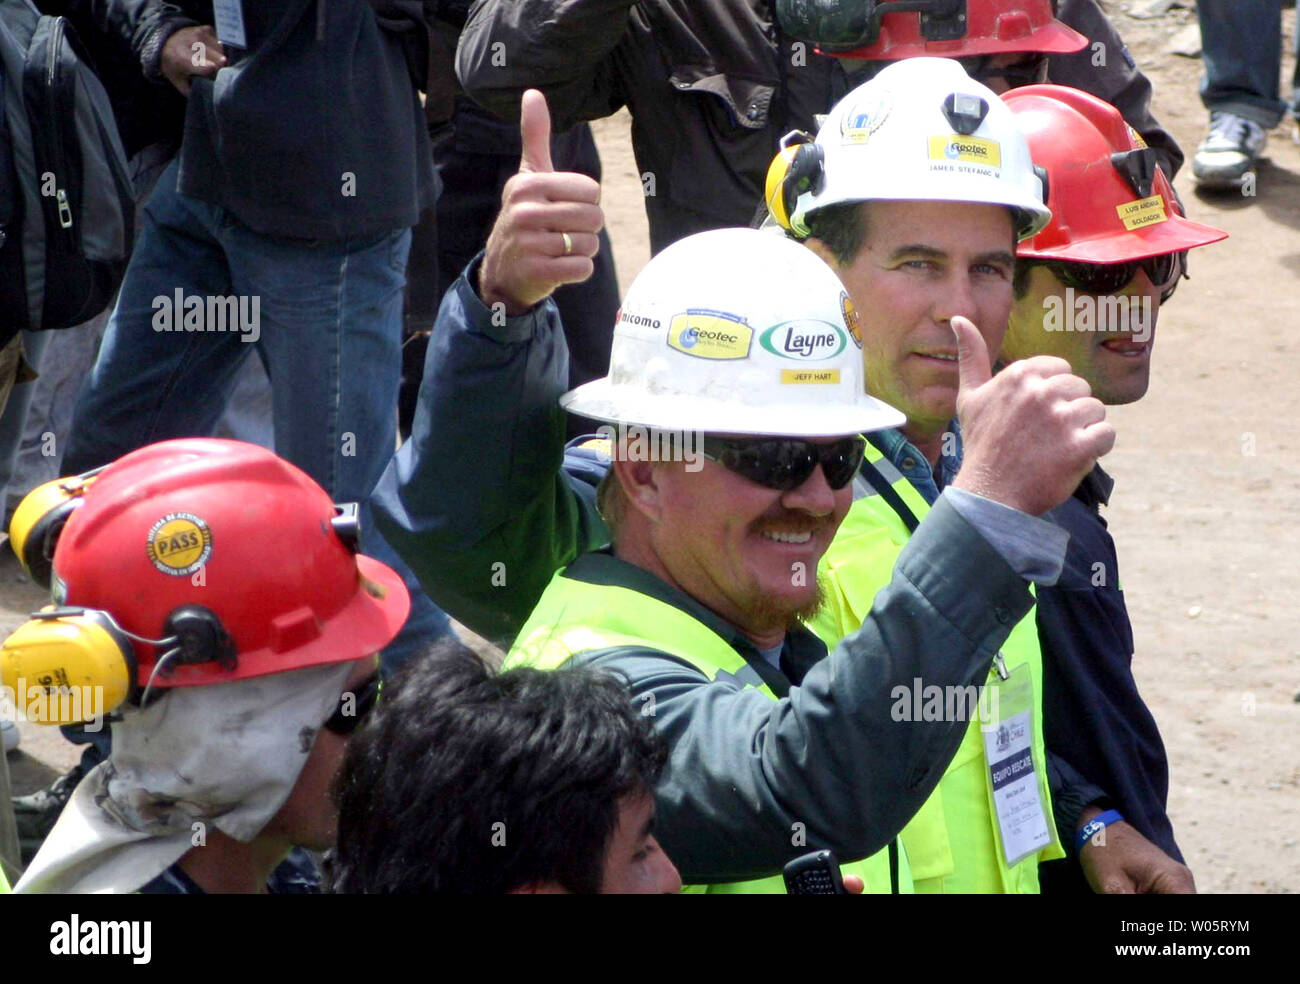 Mine workers give the 'thumbs-up' as preparations continue to rescue the 33 trapped miners at San Jose Mine, Chile on October 11, 2010.   If all goes well, officials say the first miners will be brought up in a few days via a 20-minute ride in a rescue capsule more than 2,000 feet below the surface.   The miners have been trapped for more than two months.   UPI/Sebastian Padilla Stock Photo